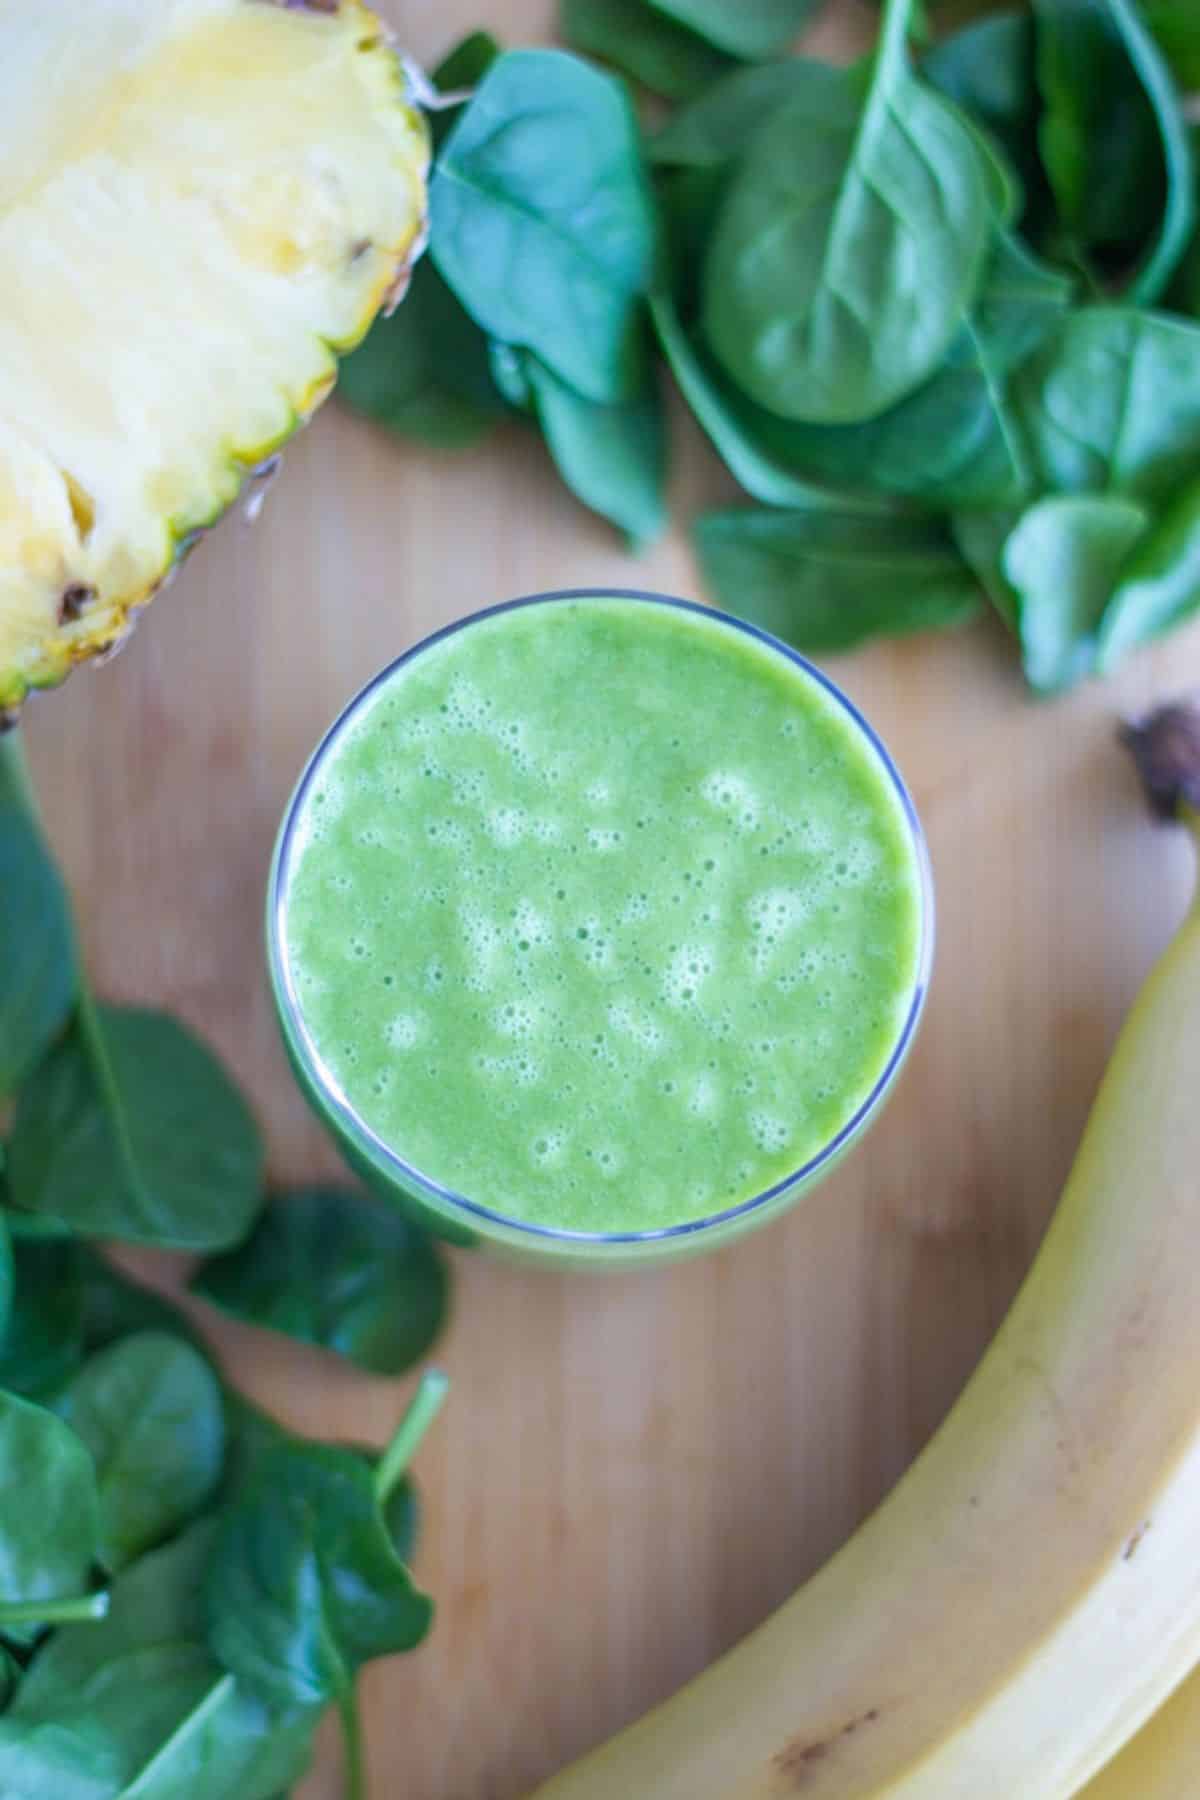 A glass of banana pineapple smoothie with pineapple. banana and bay spinach surrounding it.